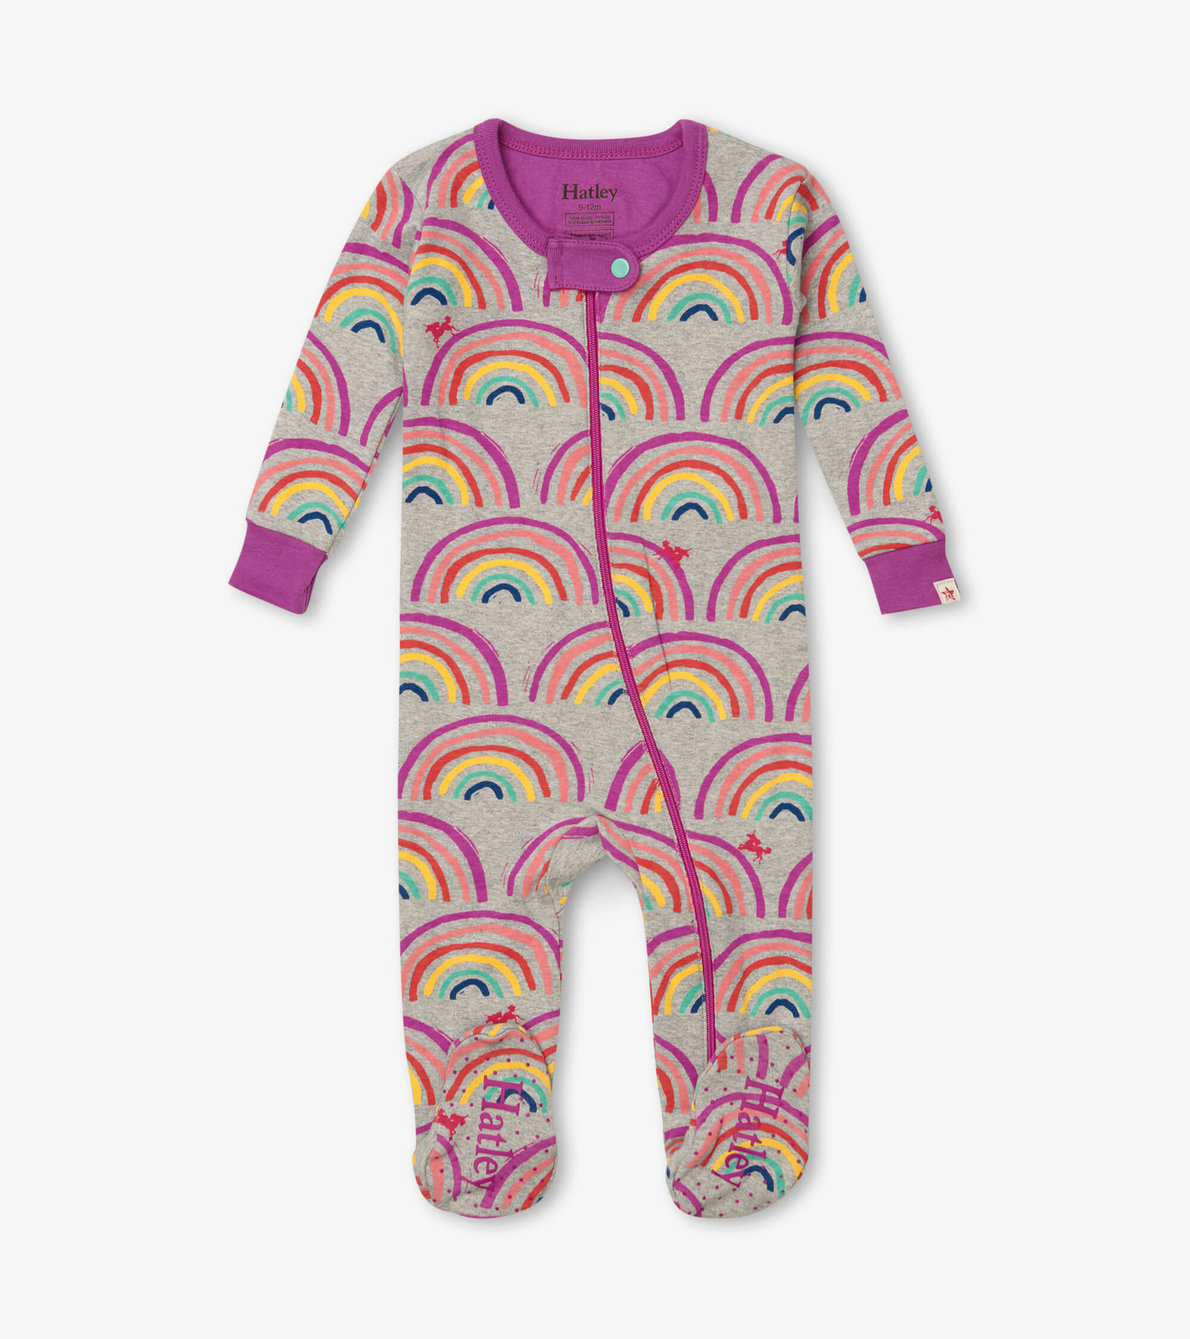 View larger image of Rainbow Dreams Organic Cotton Footed Coverall